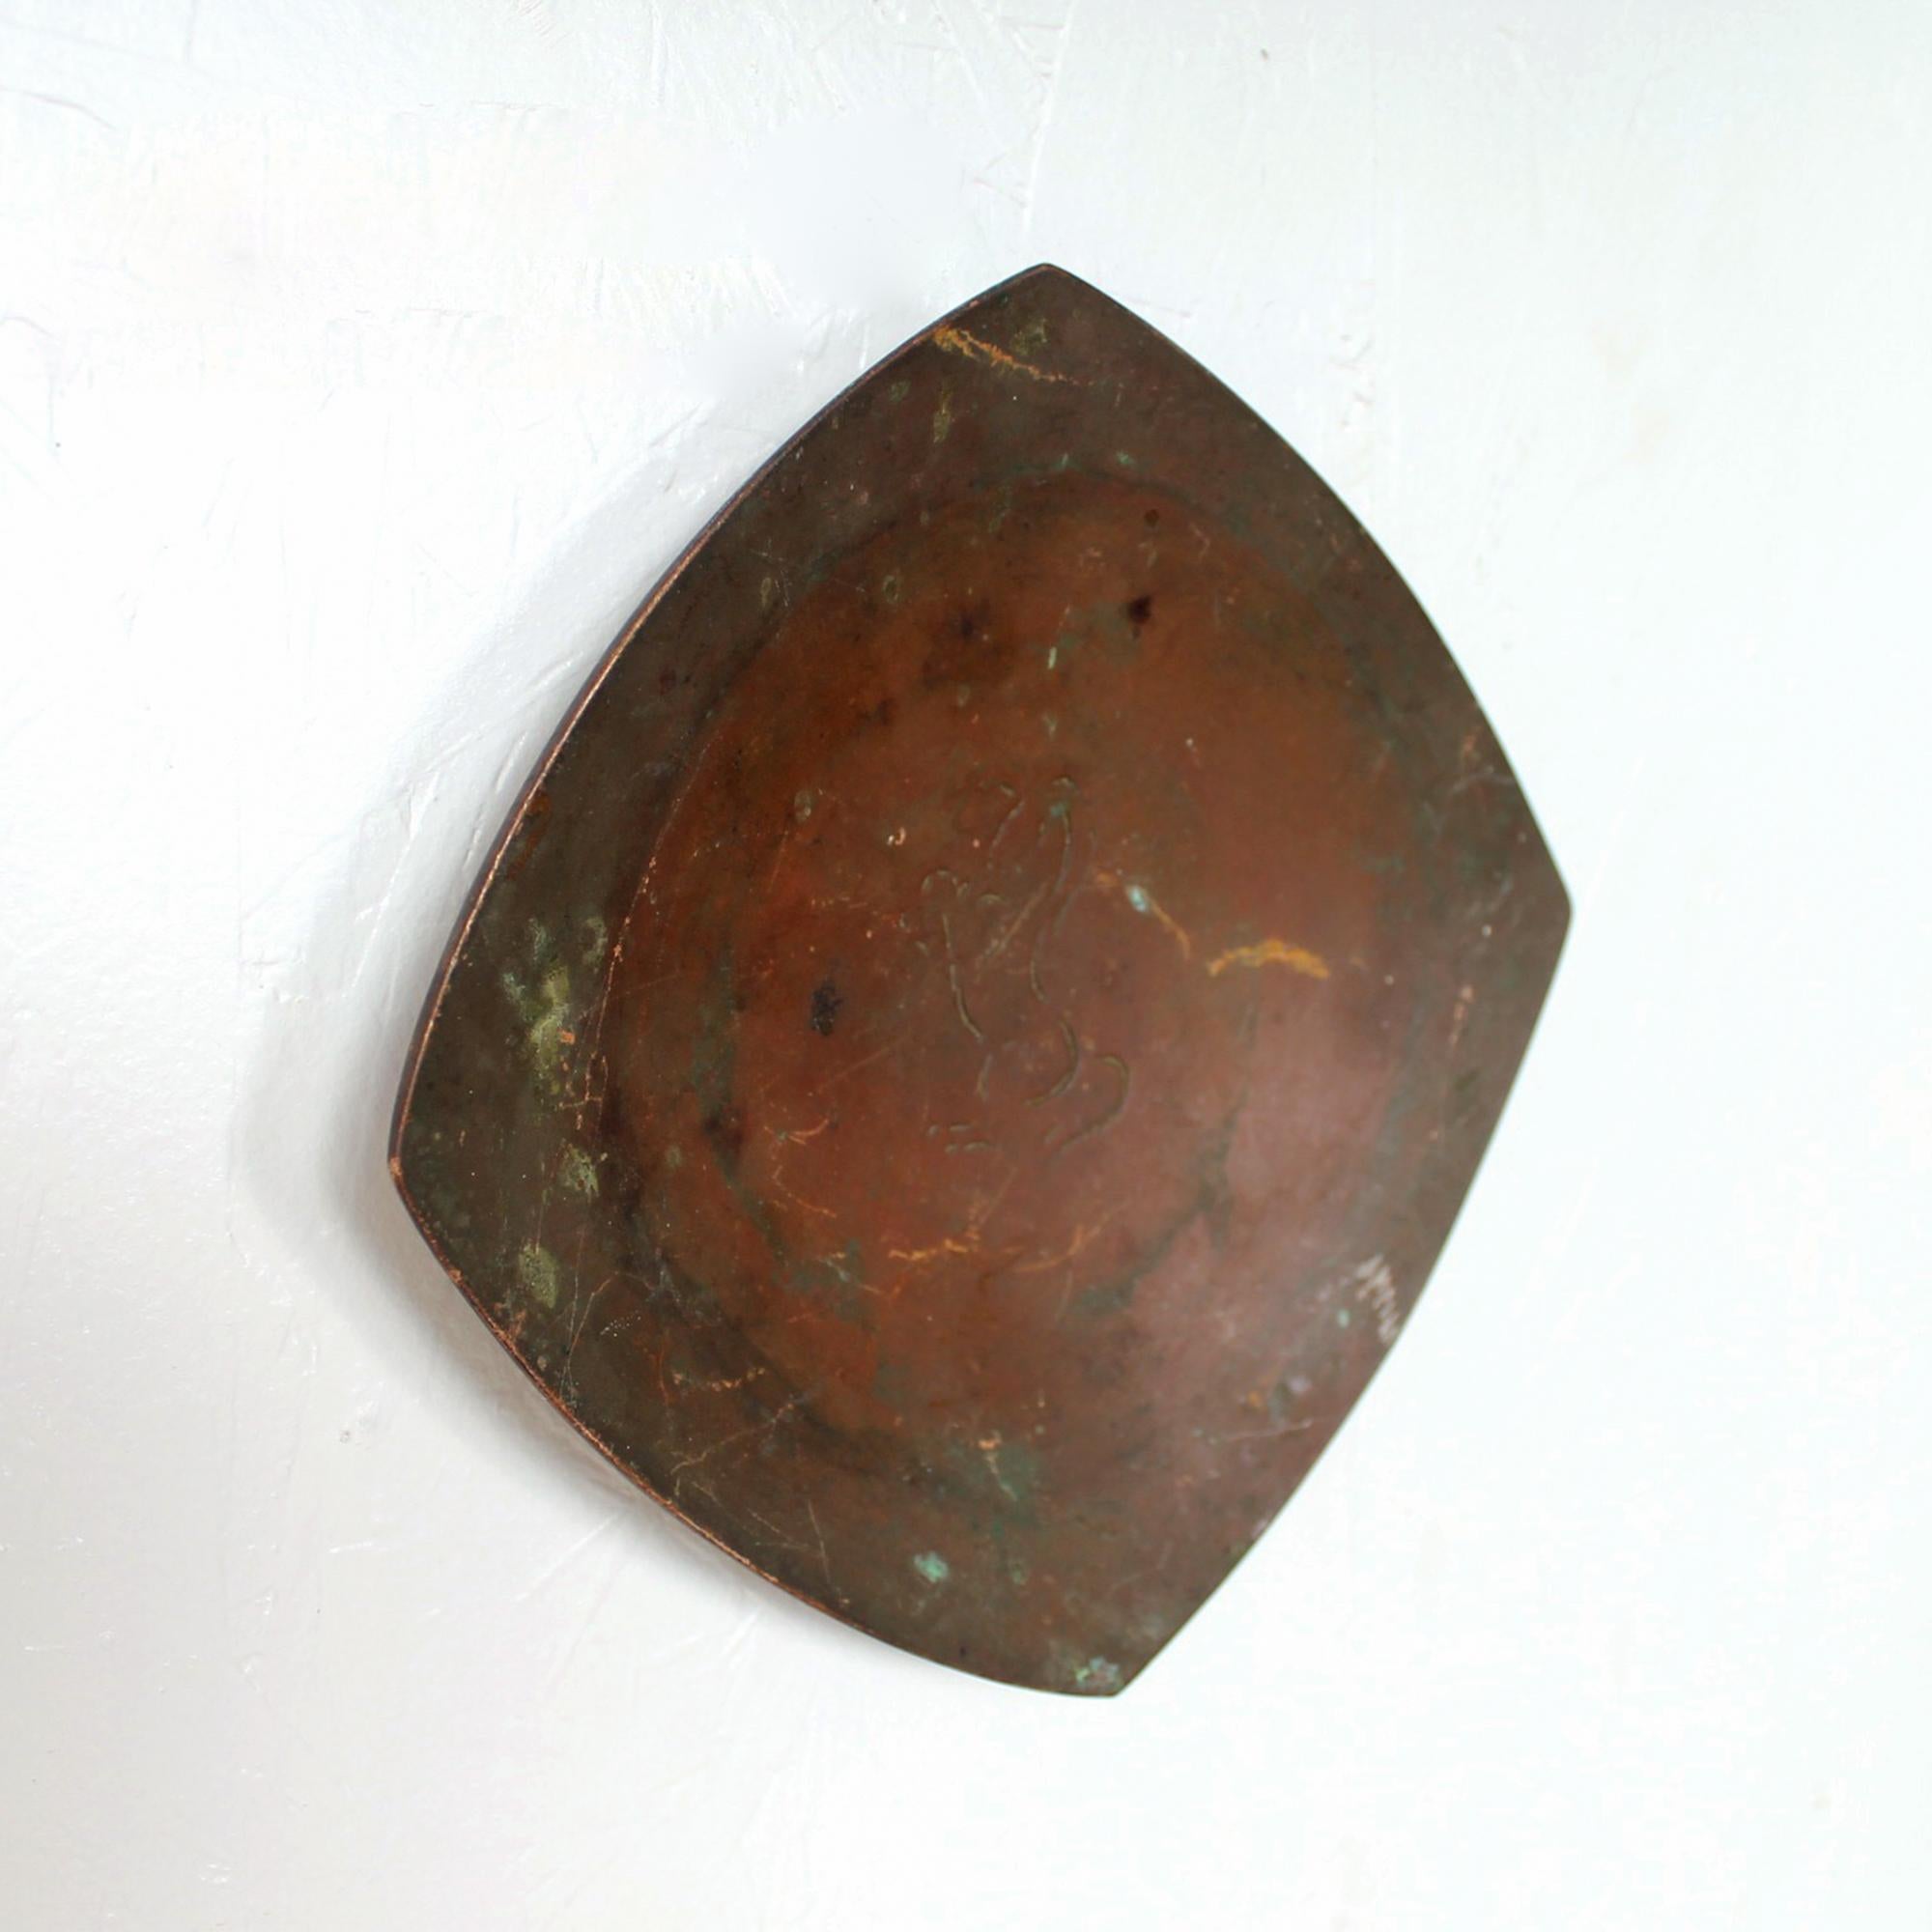 Mid-Century Modern 1960s California Bronze Square Dish with Horse Design by Wah Ming Chang